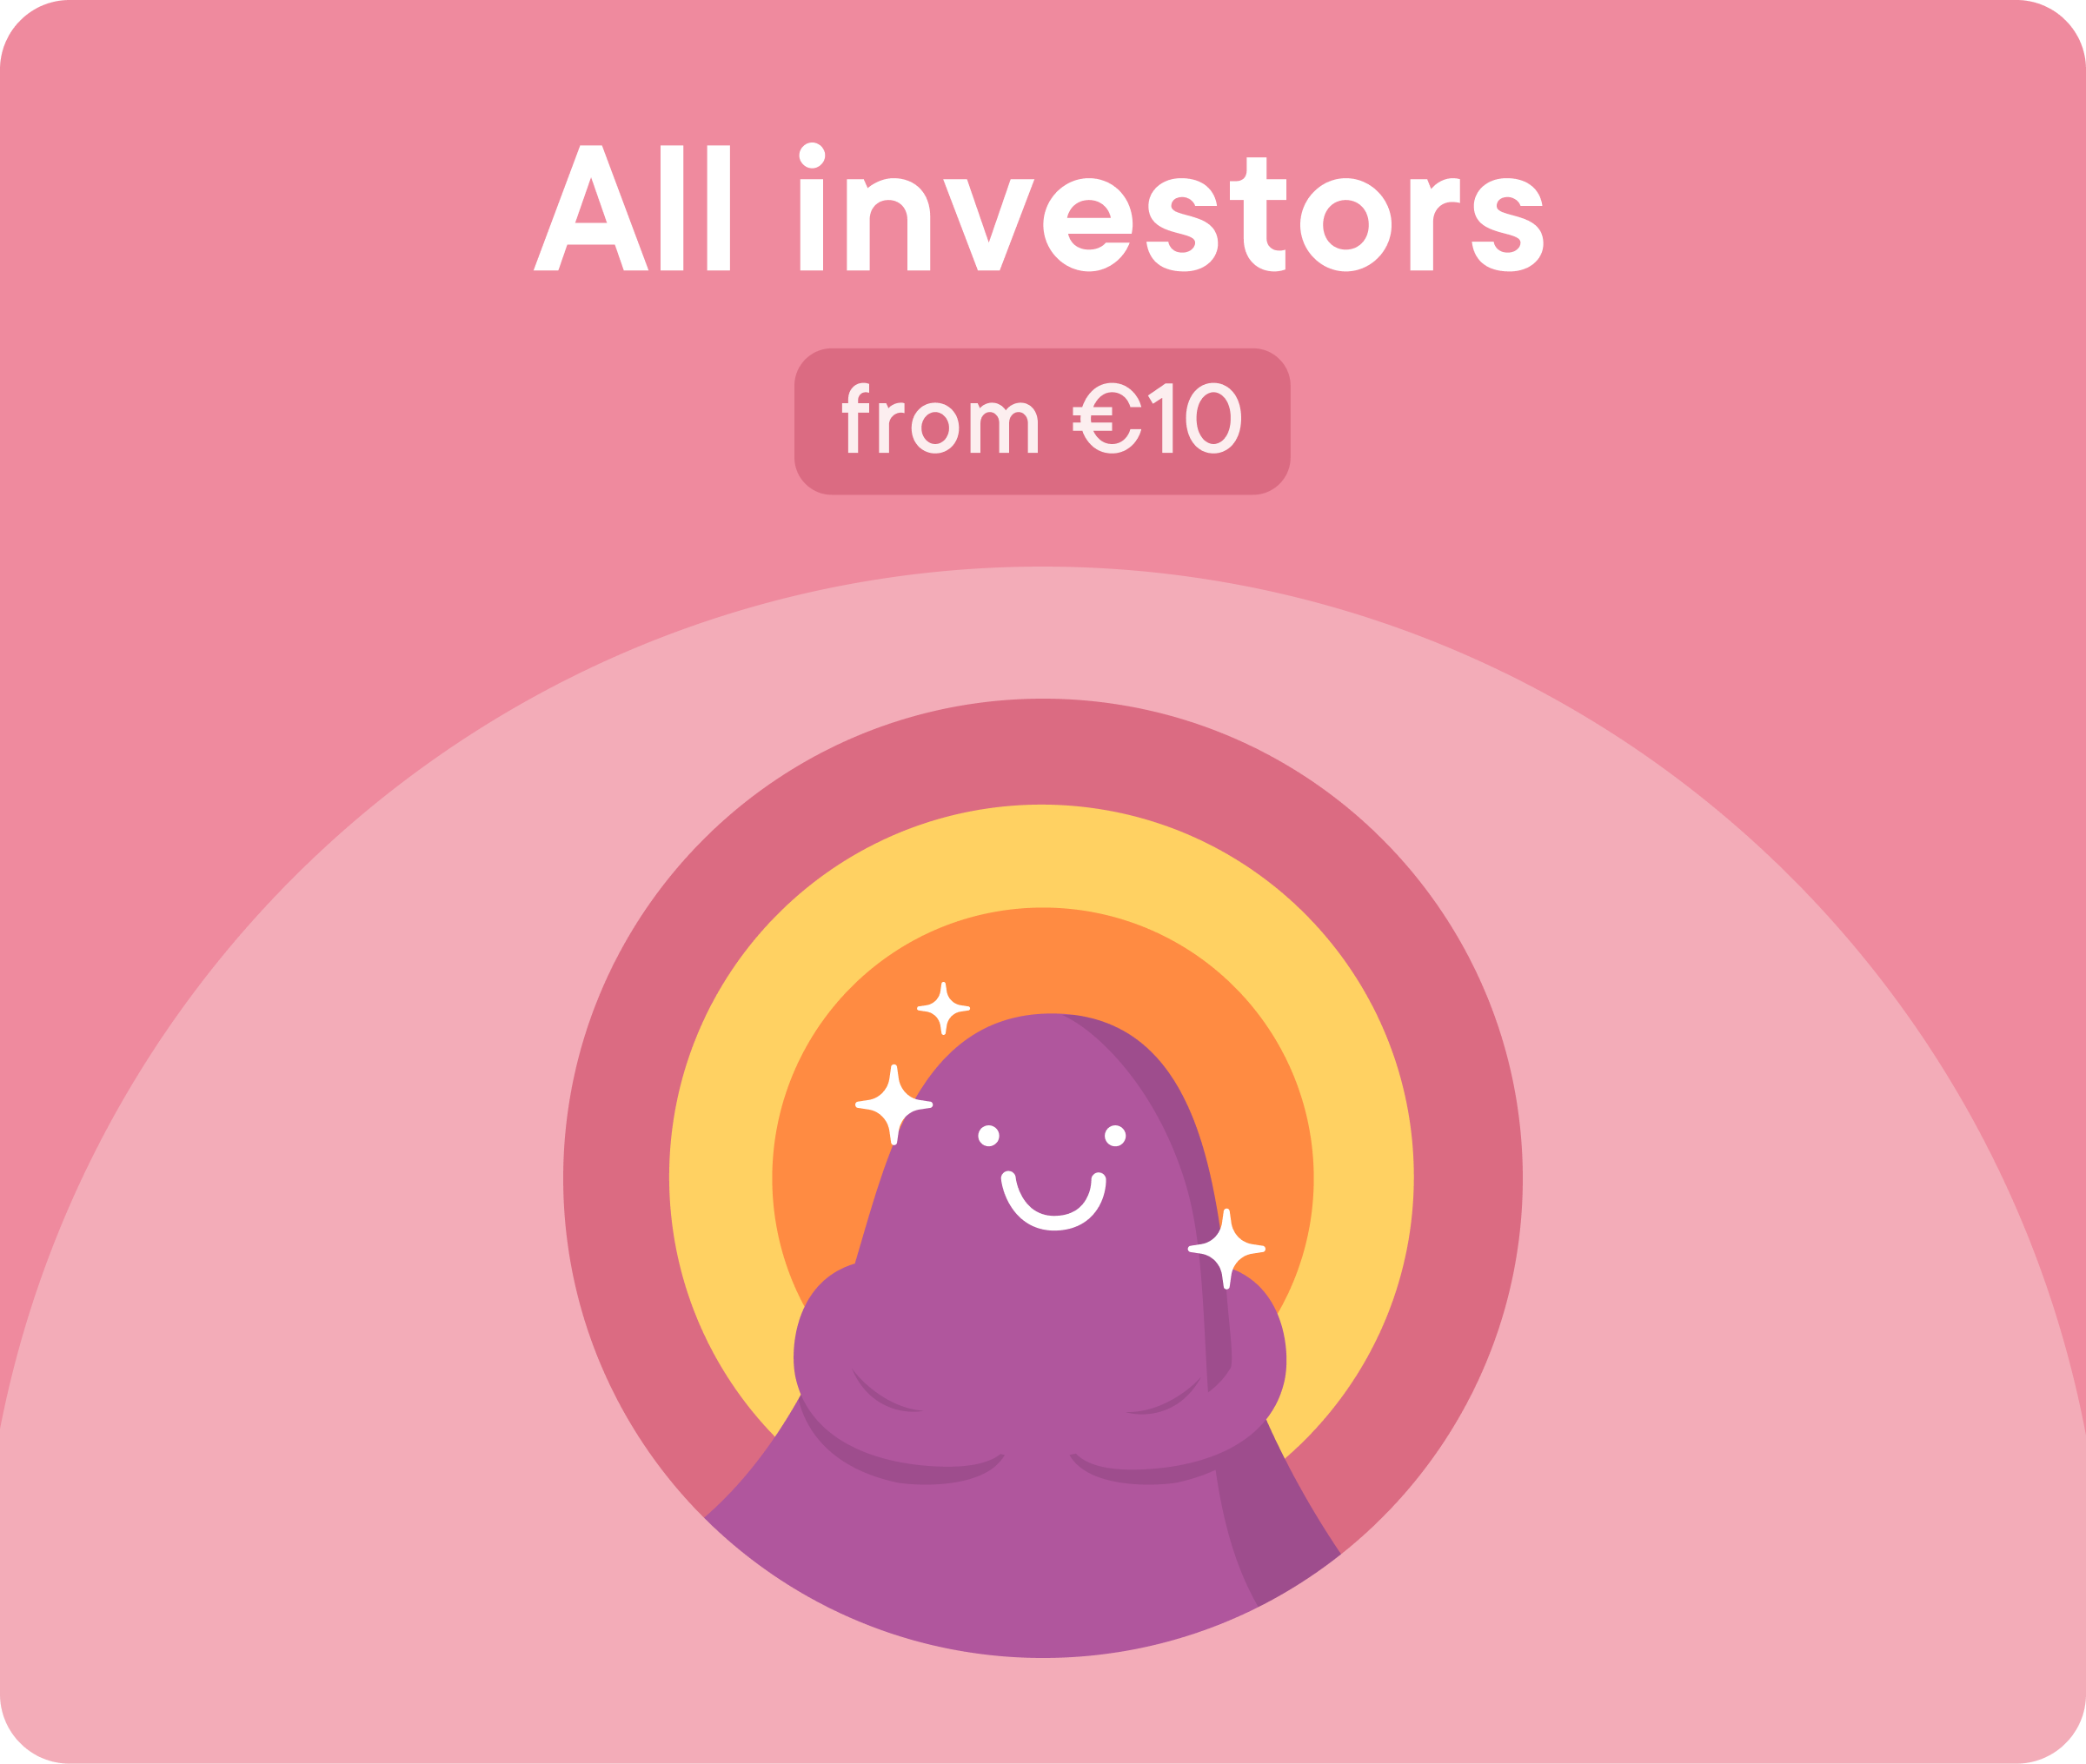 All investors from €10 